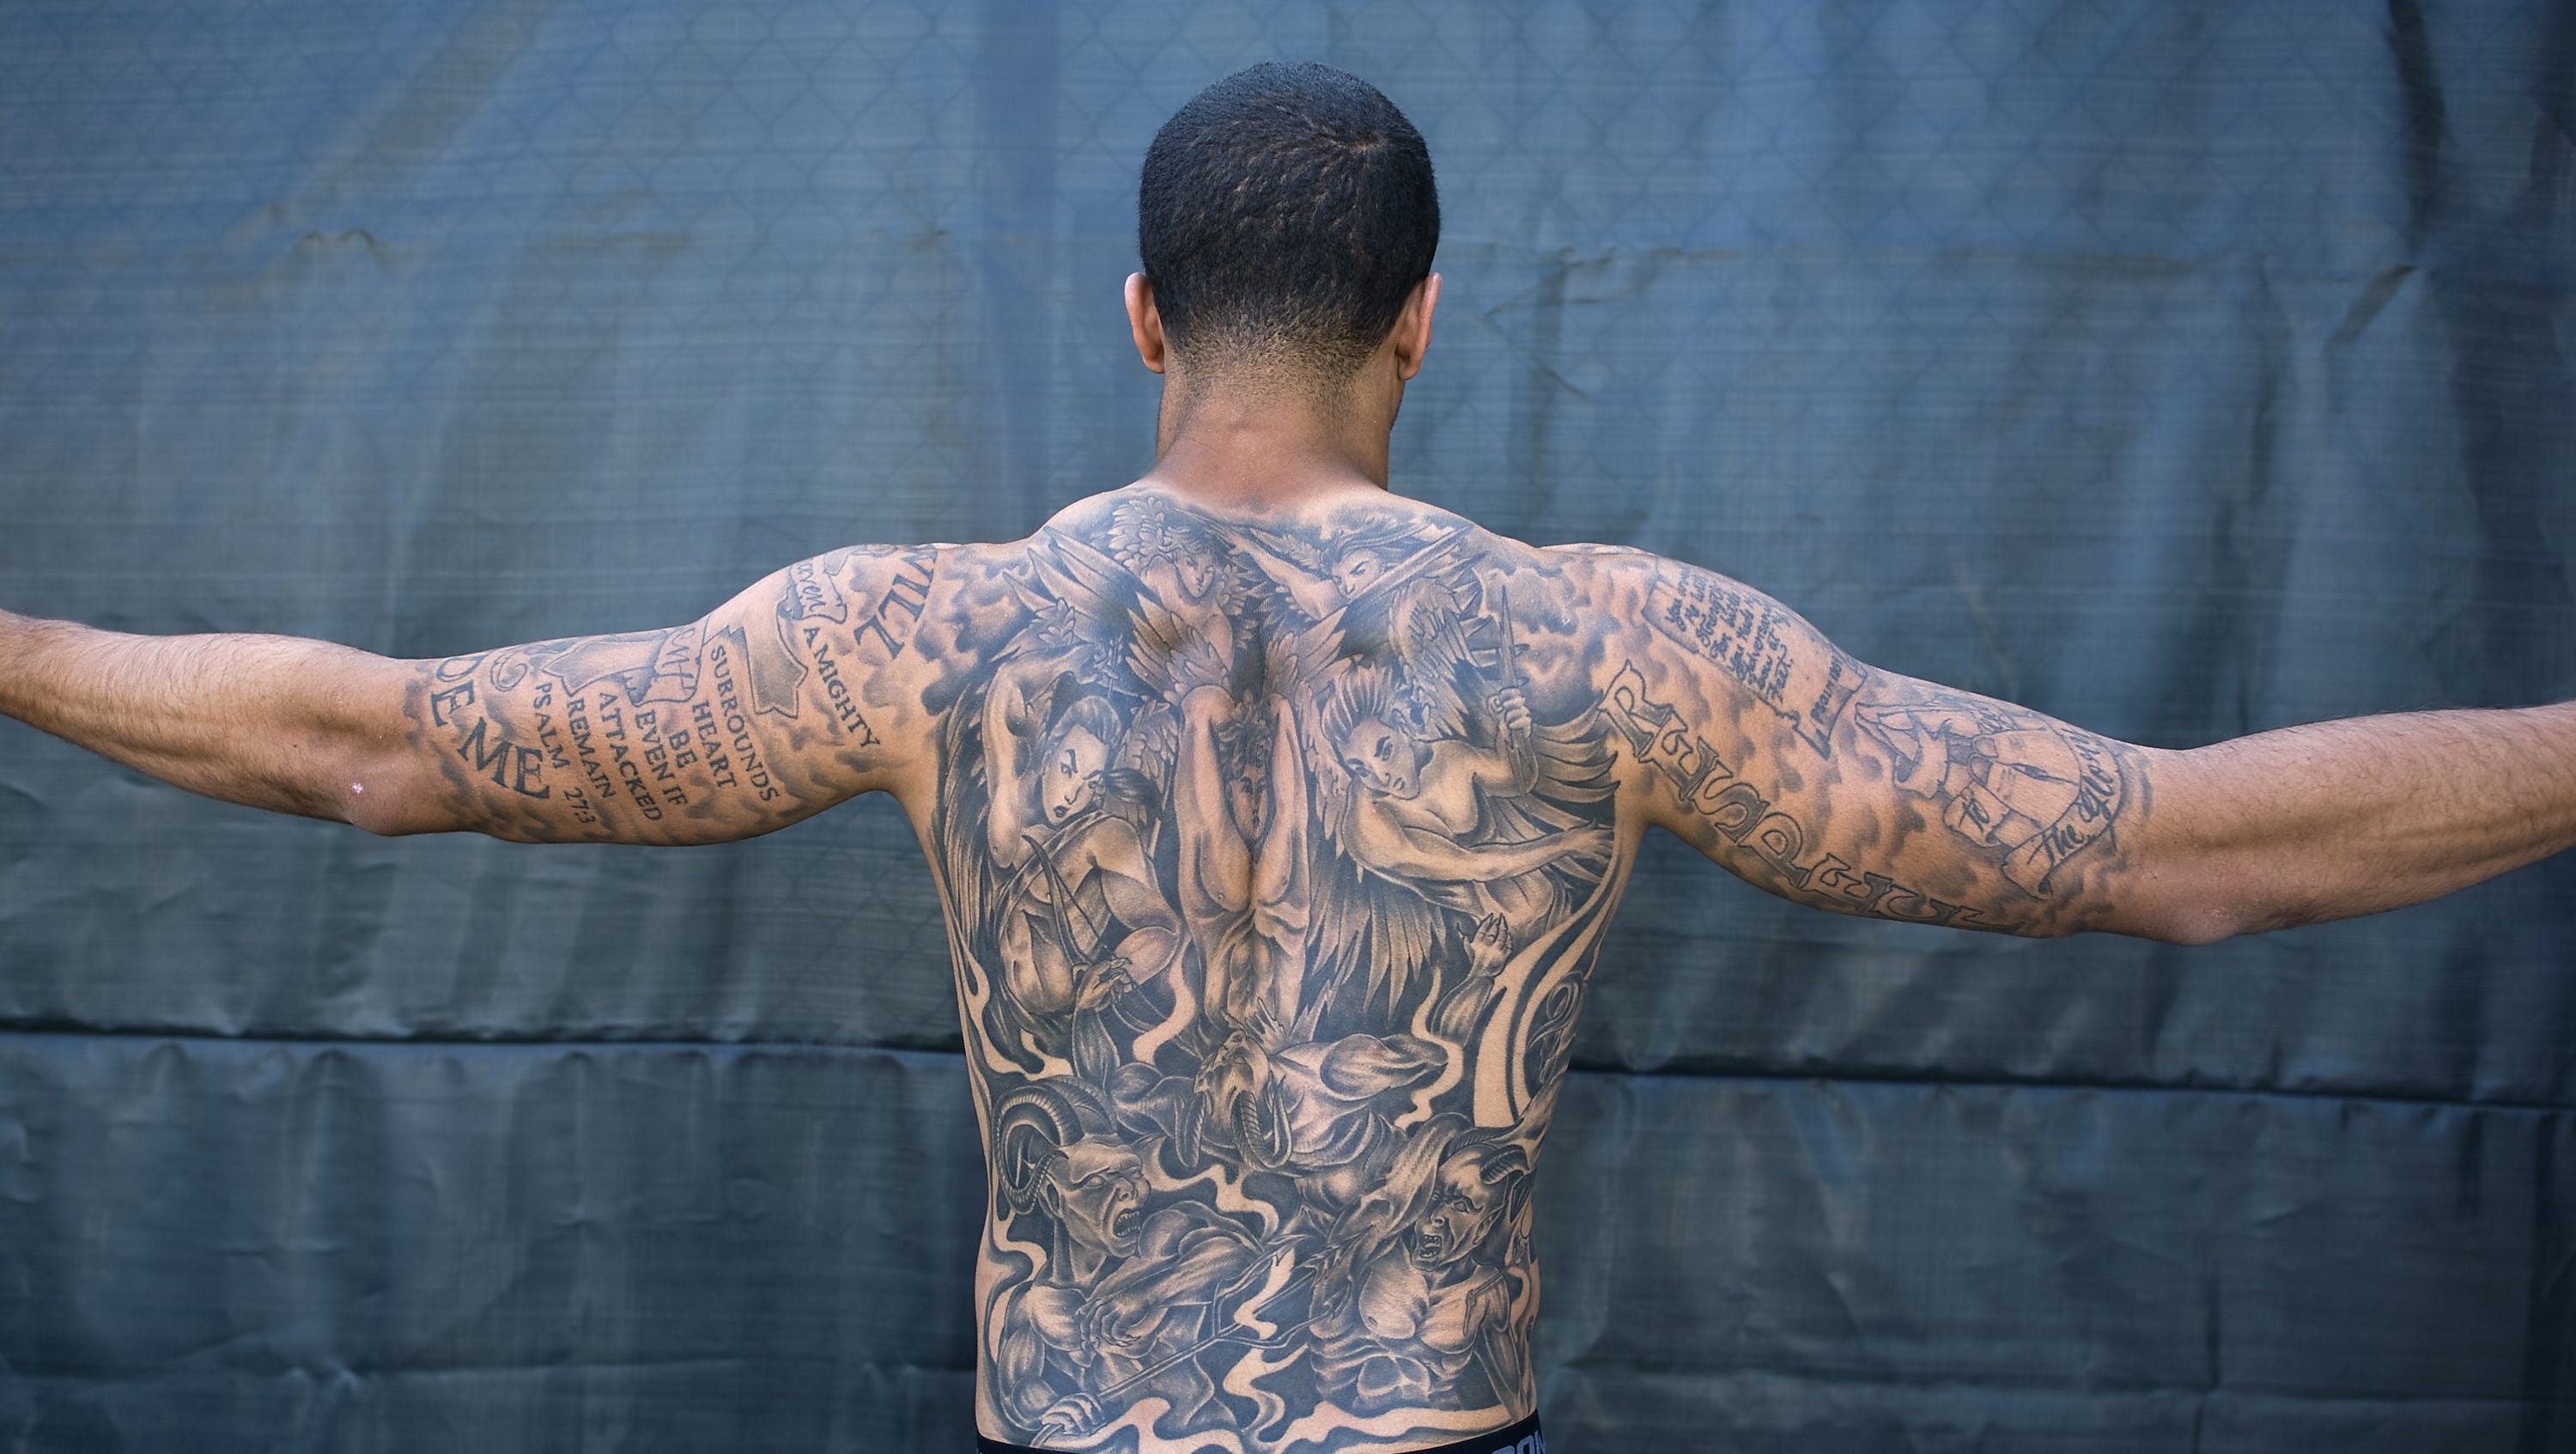 An Nfl Qb With Tattoos Shouldn T Be All That Shocking